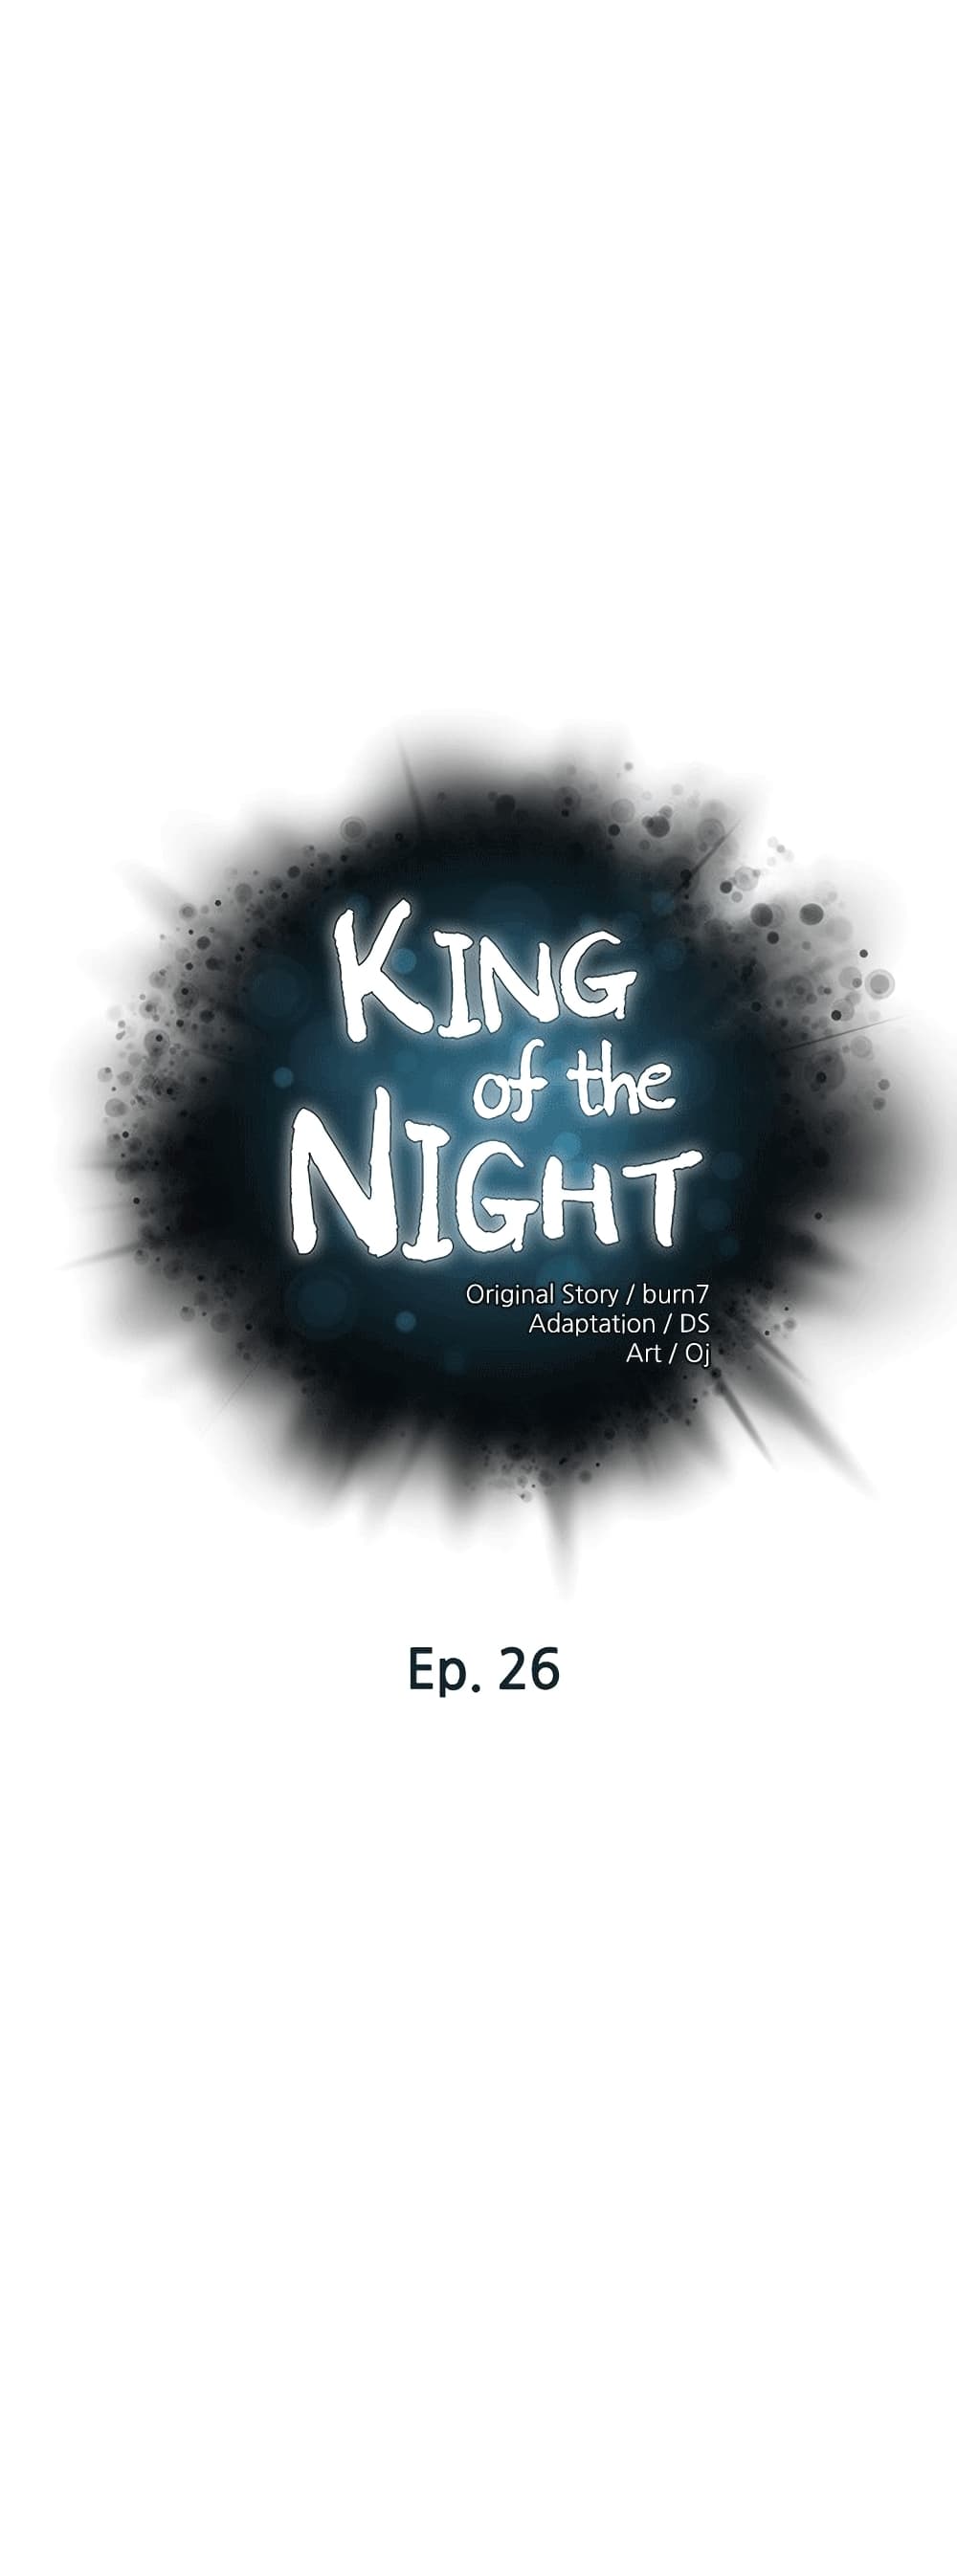 King of the Night 26 01